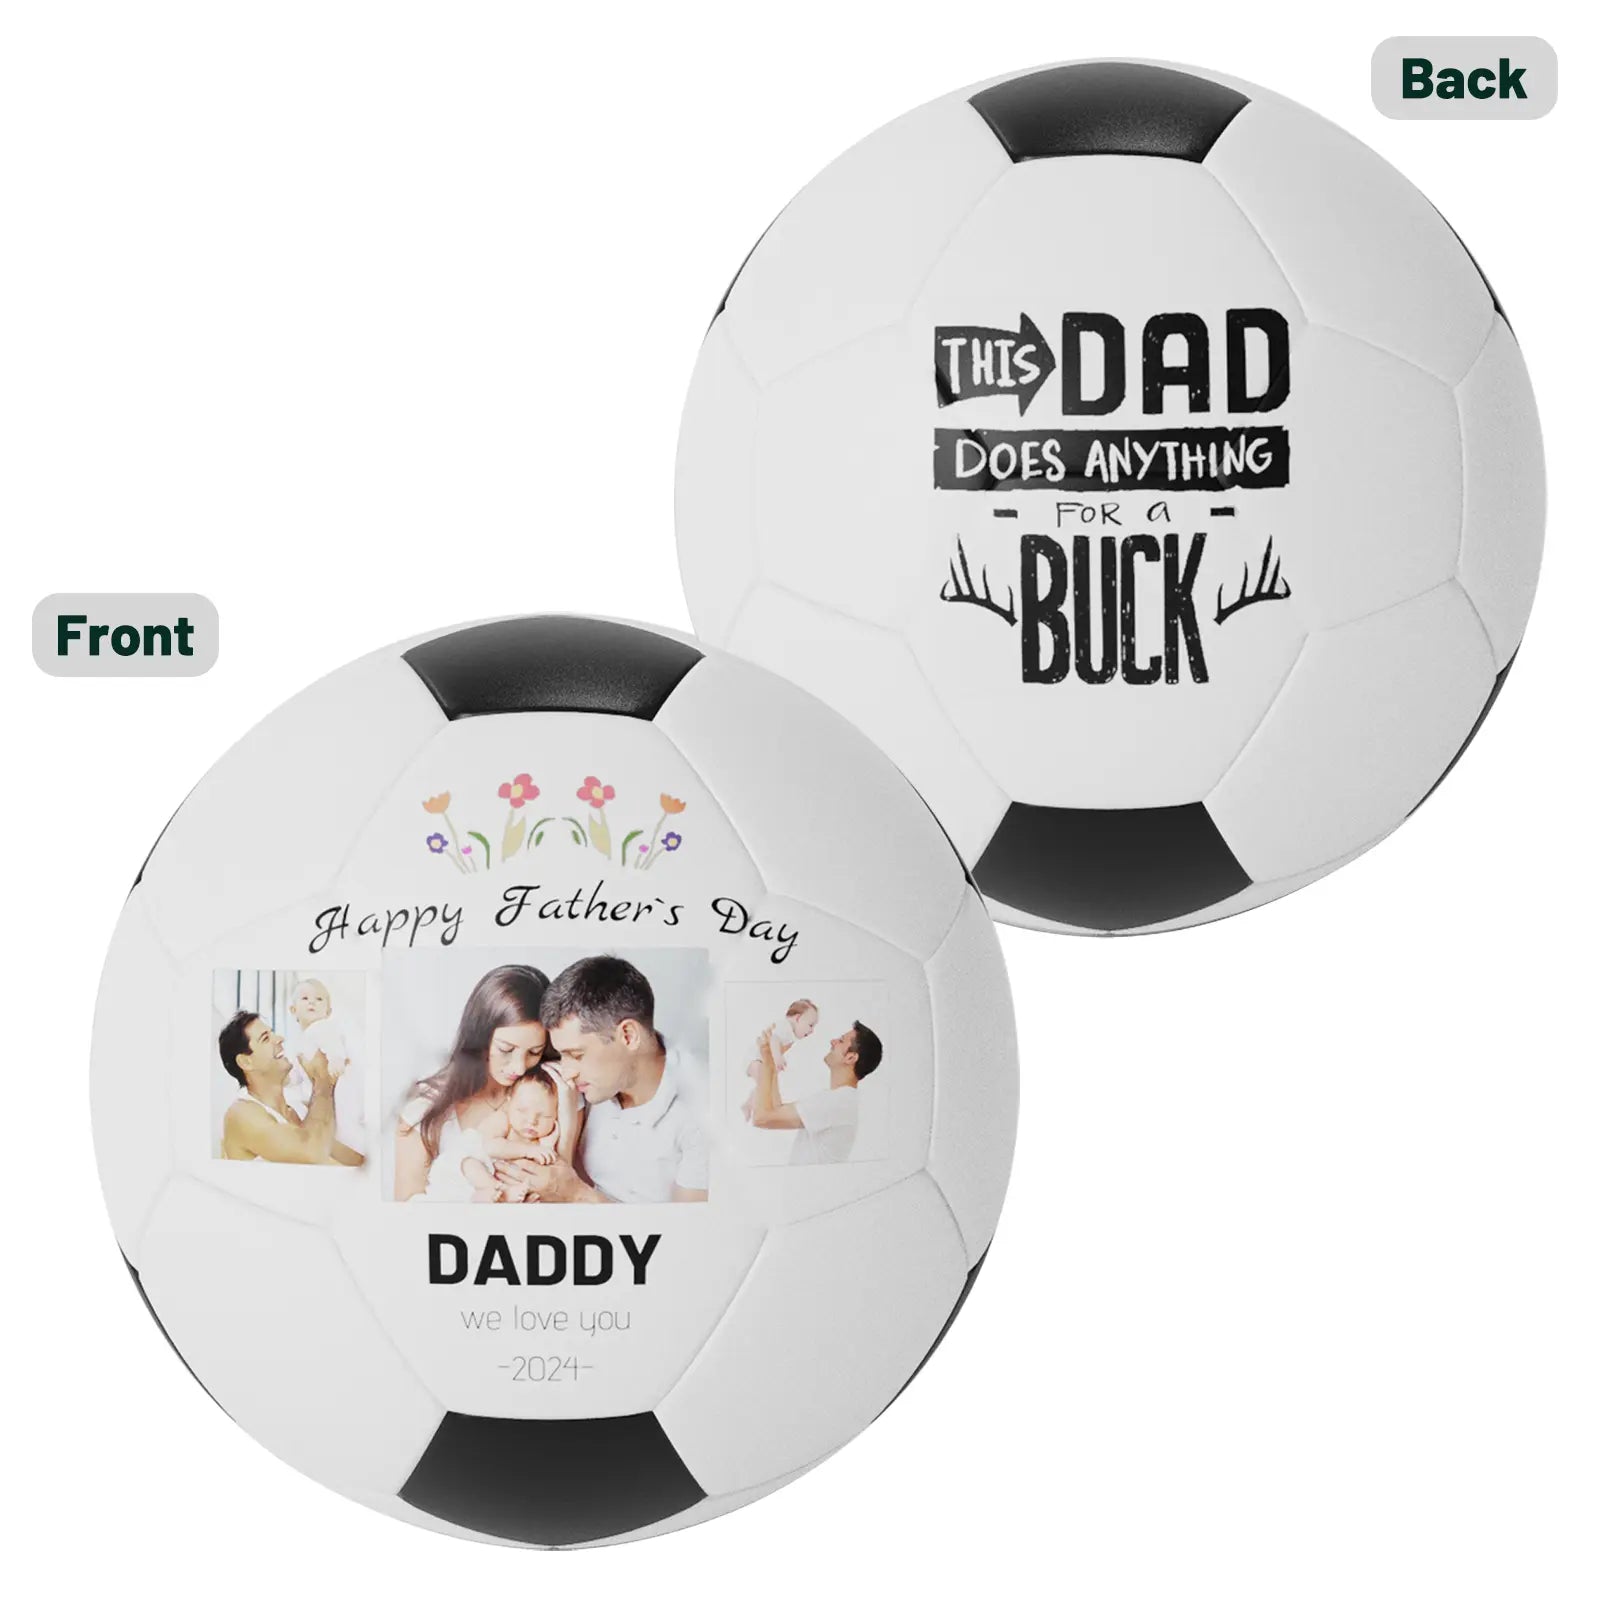 Personalized Custom Photo/Text Soccer Ball Gifts For Dad, Mom, Son, Daughter, Grandson - Family Watchs